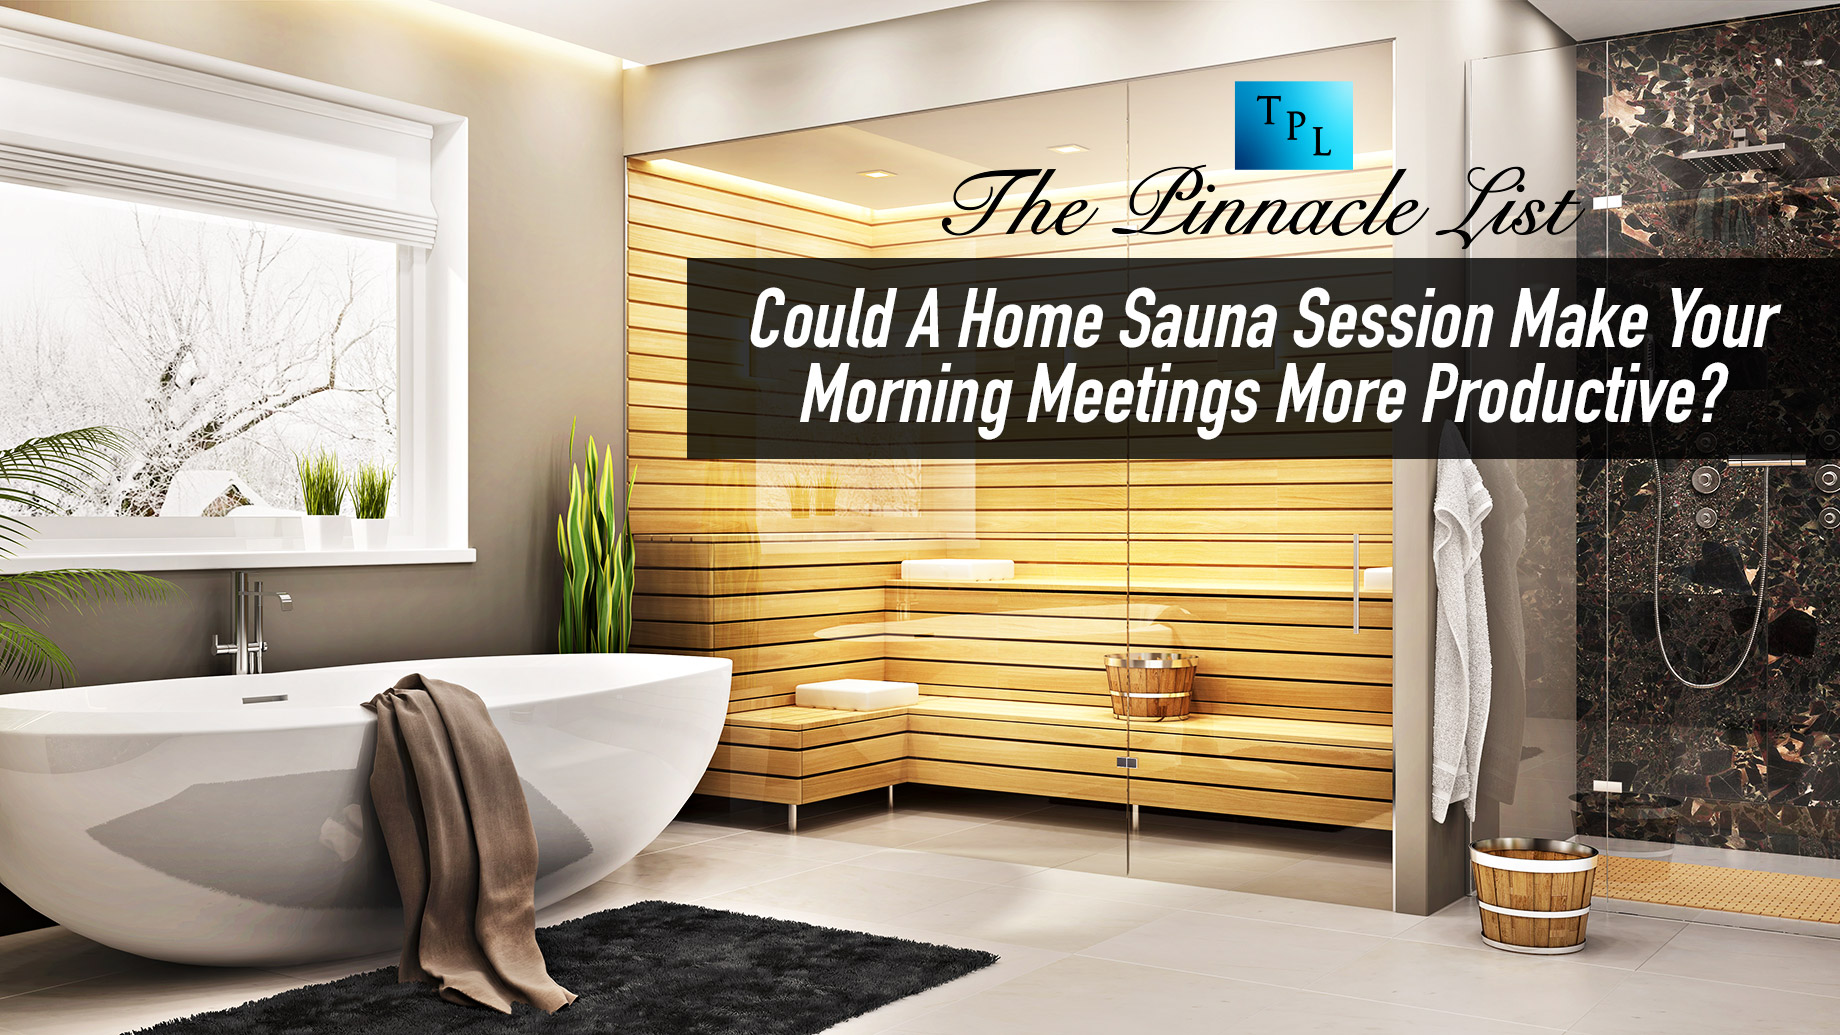 Could A Home Sauna Session Make Your Morning Meetings More Productive?